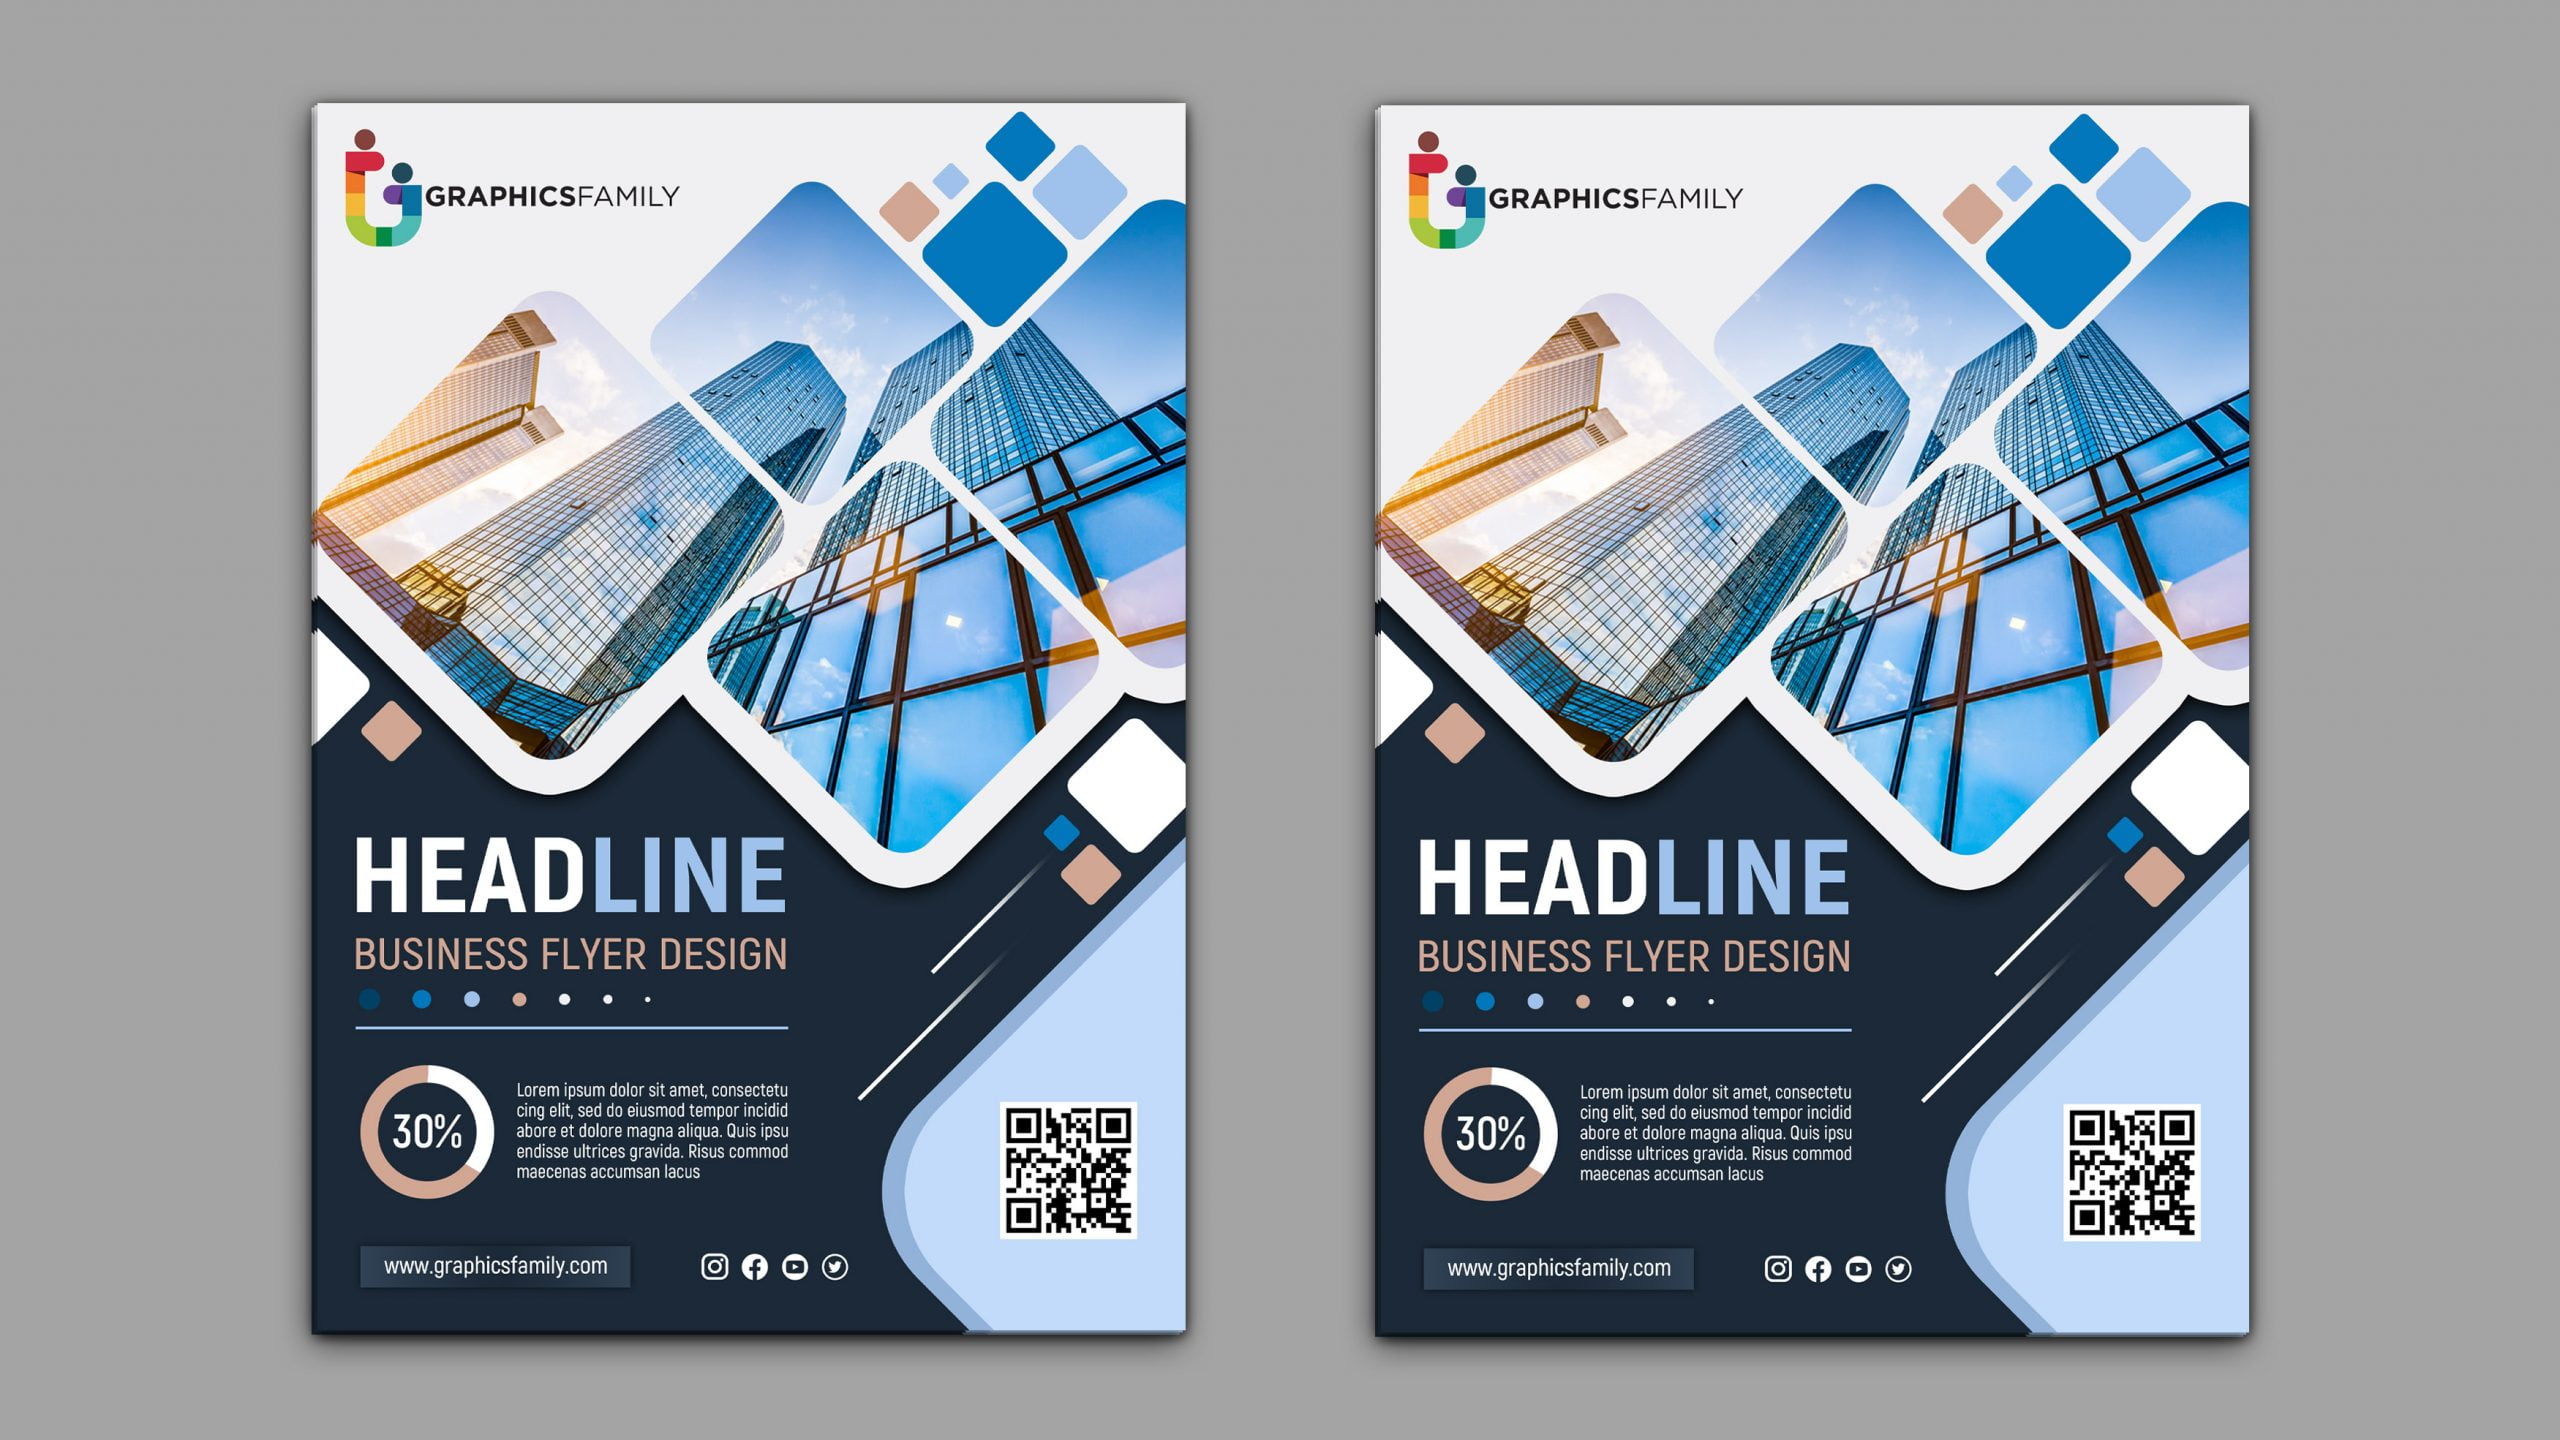 Official Business Flyer Design Free PSD – GraphicsFamily For Create A Free Flyer Template